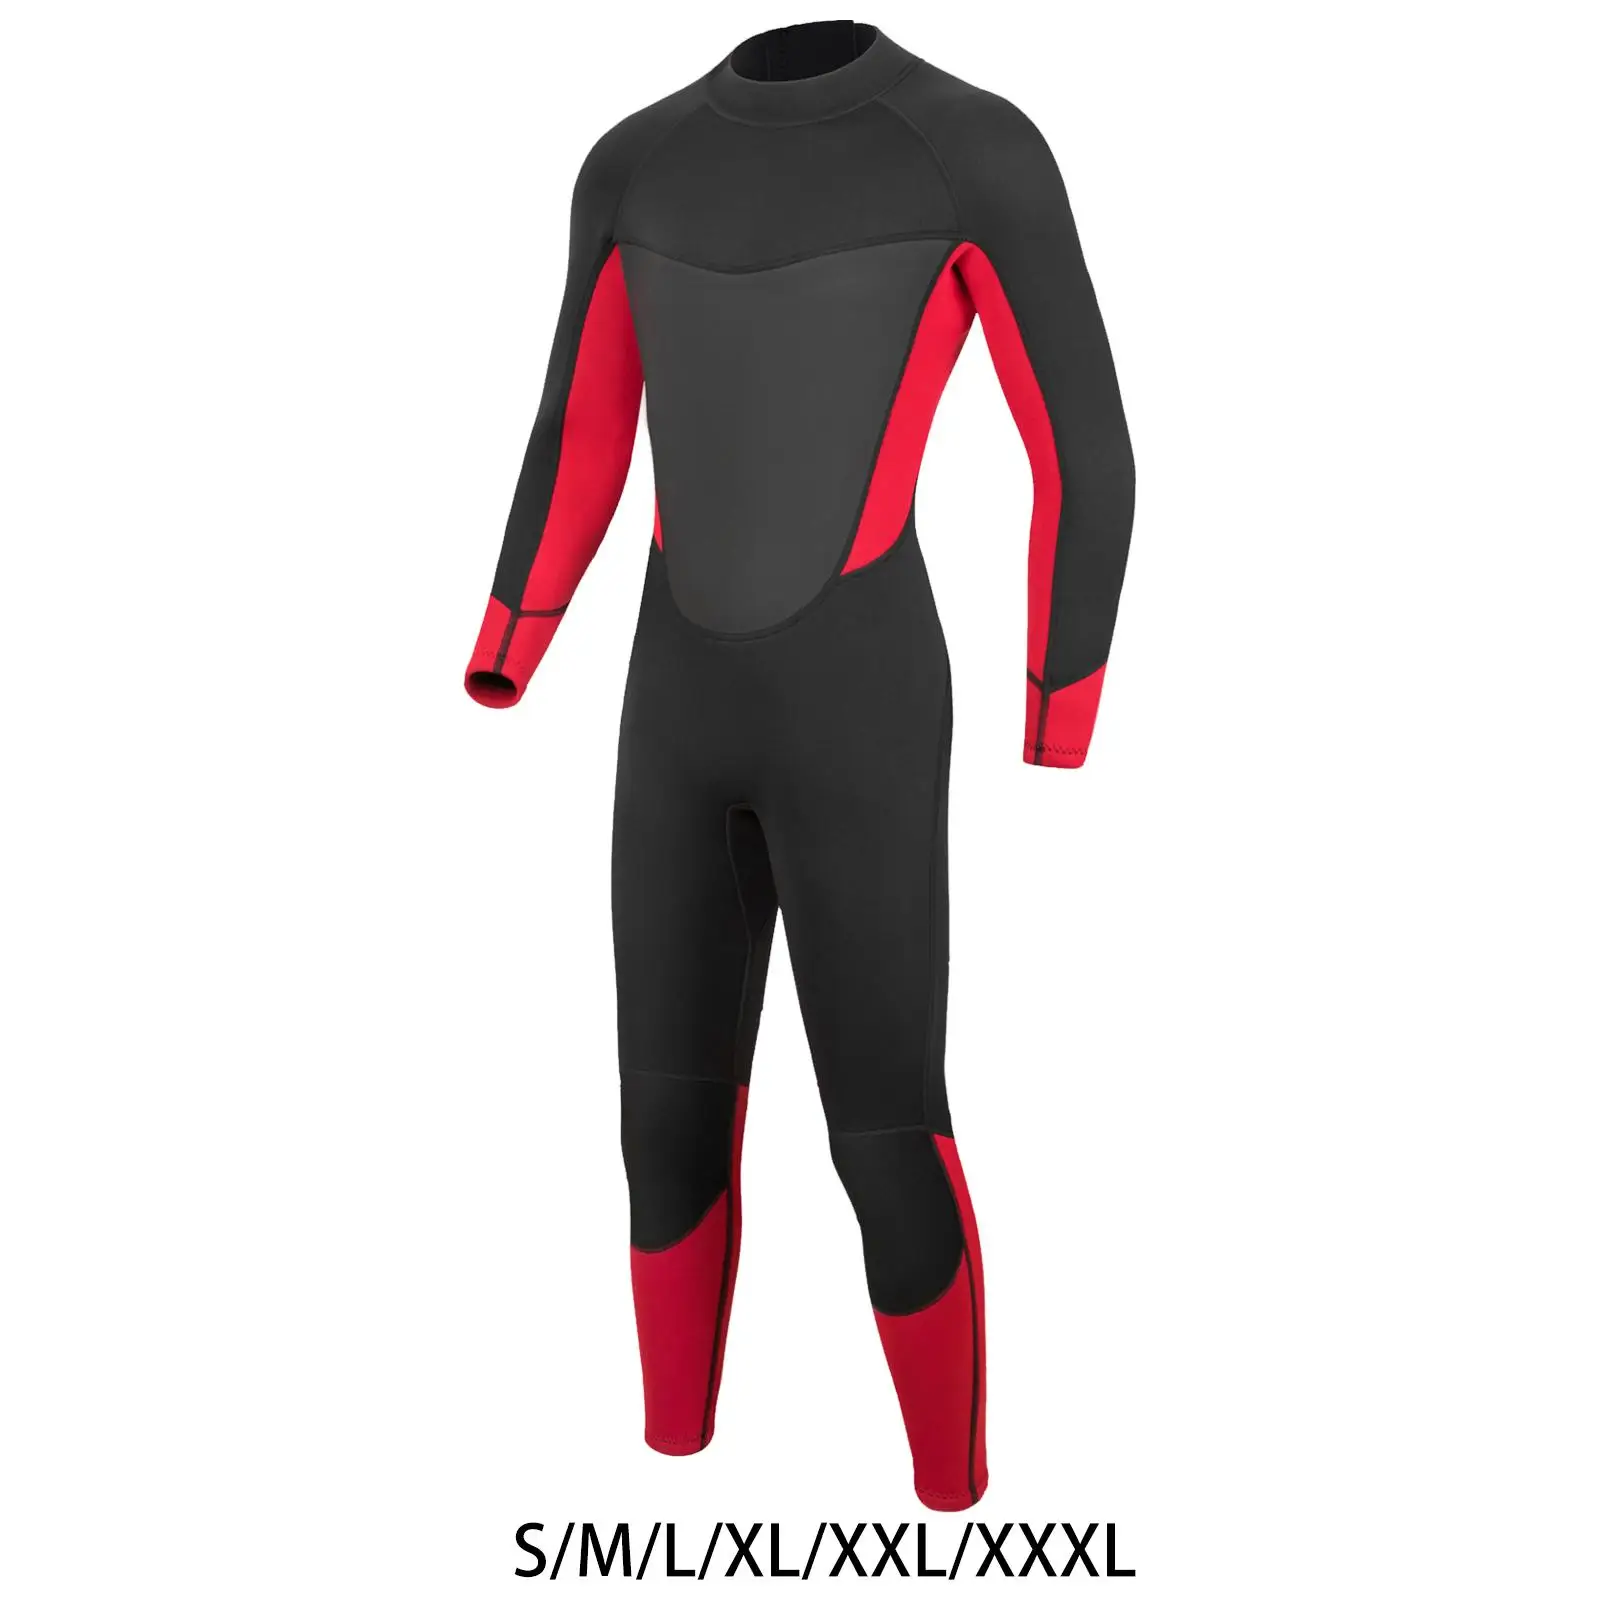 Men's Wetsuit Full Body Diving Suit for Water Sports Canoeing Snorkeling Surfing